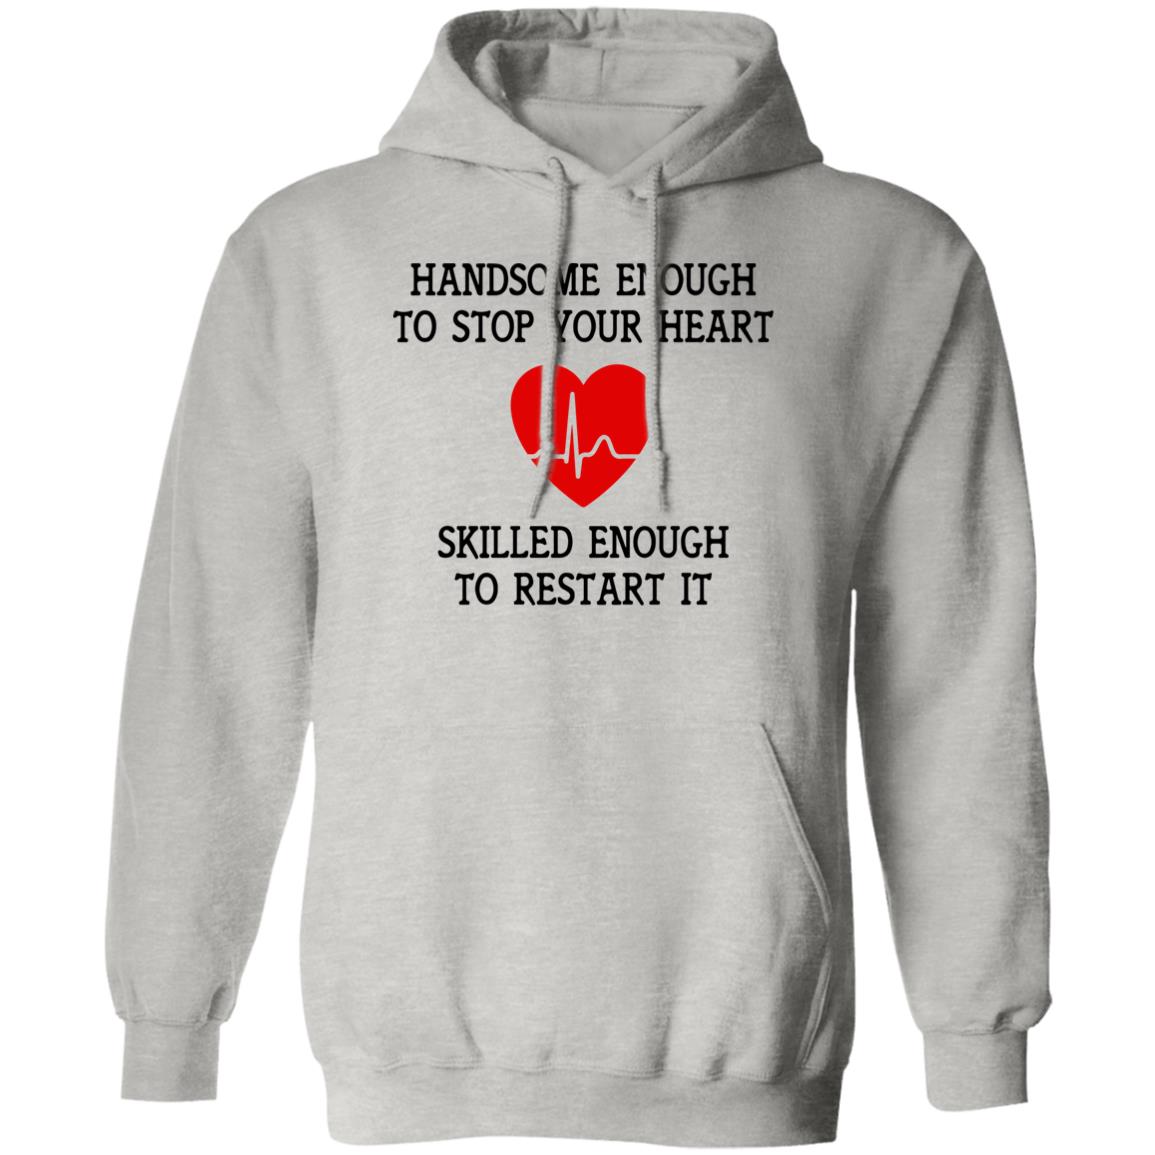 Handsome Enough To Stop Your Heart Hoodie